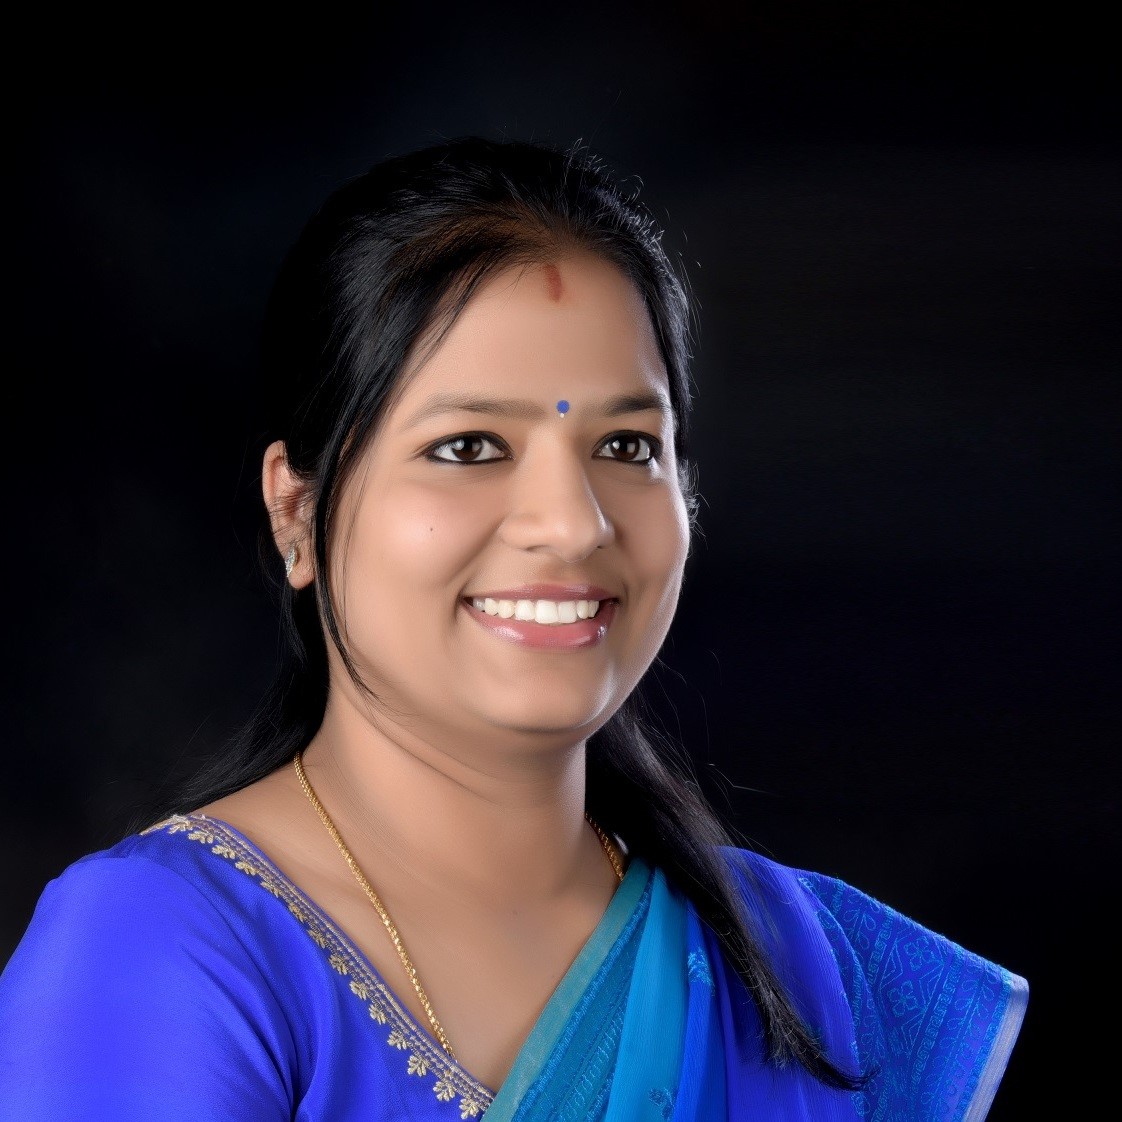 VINDHYA: Empowering Lives Through Inclusive Business : Pavithra Y